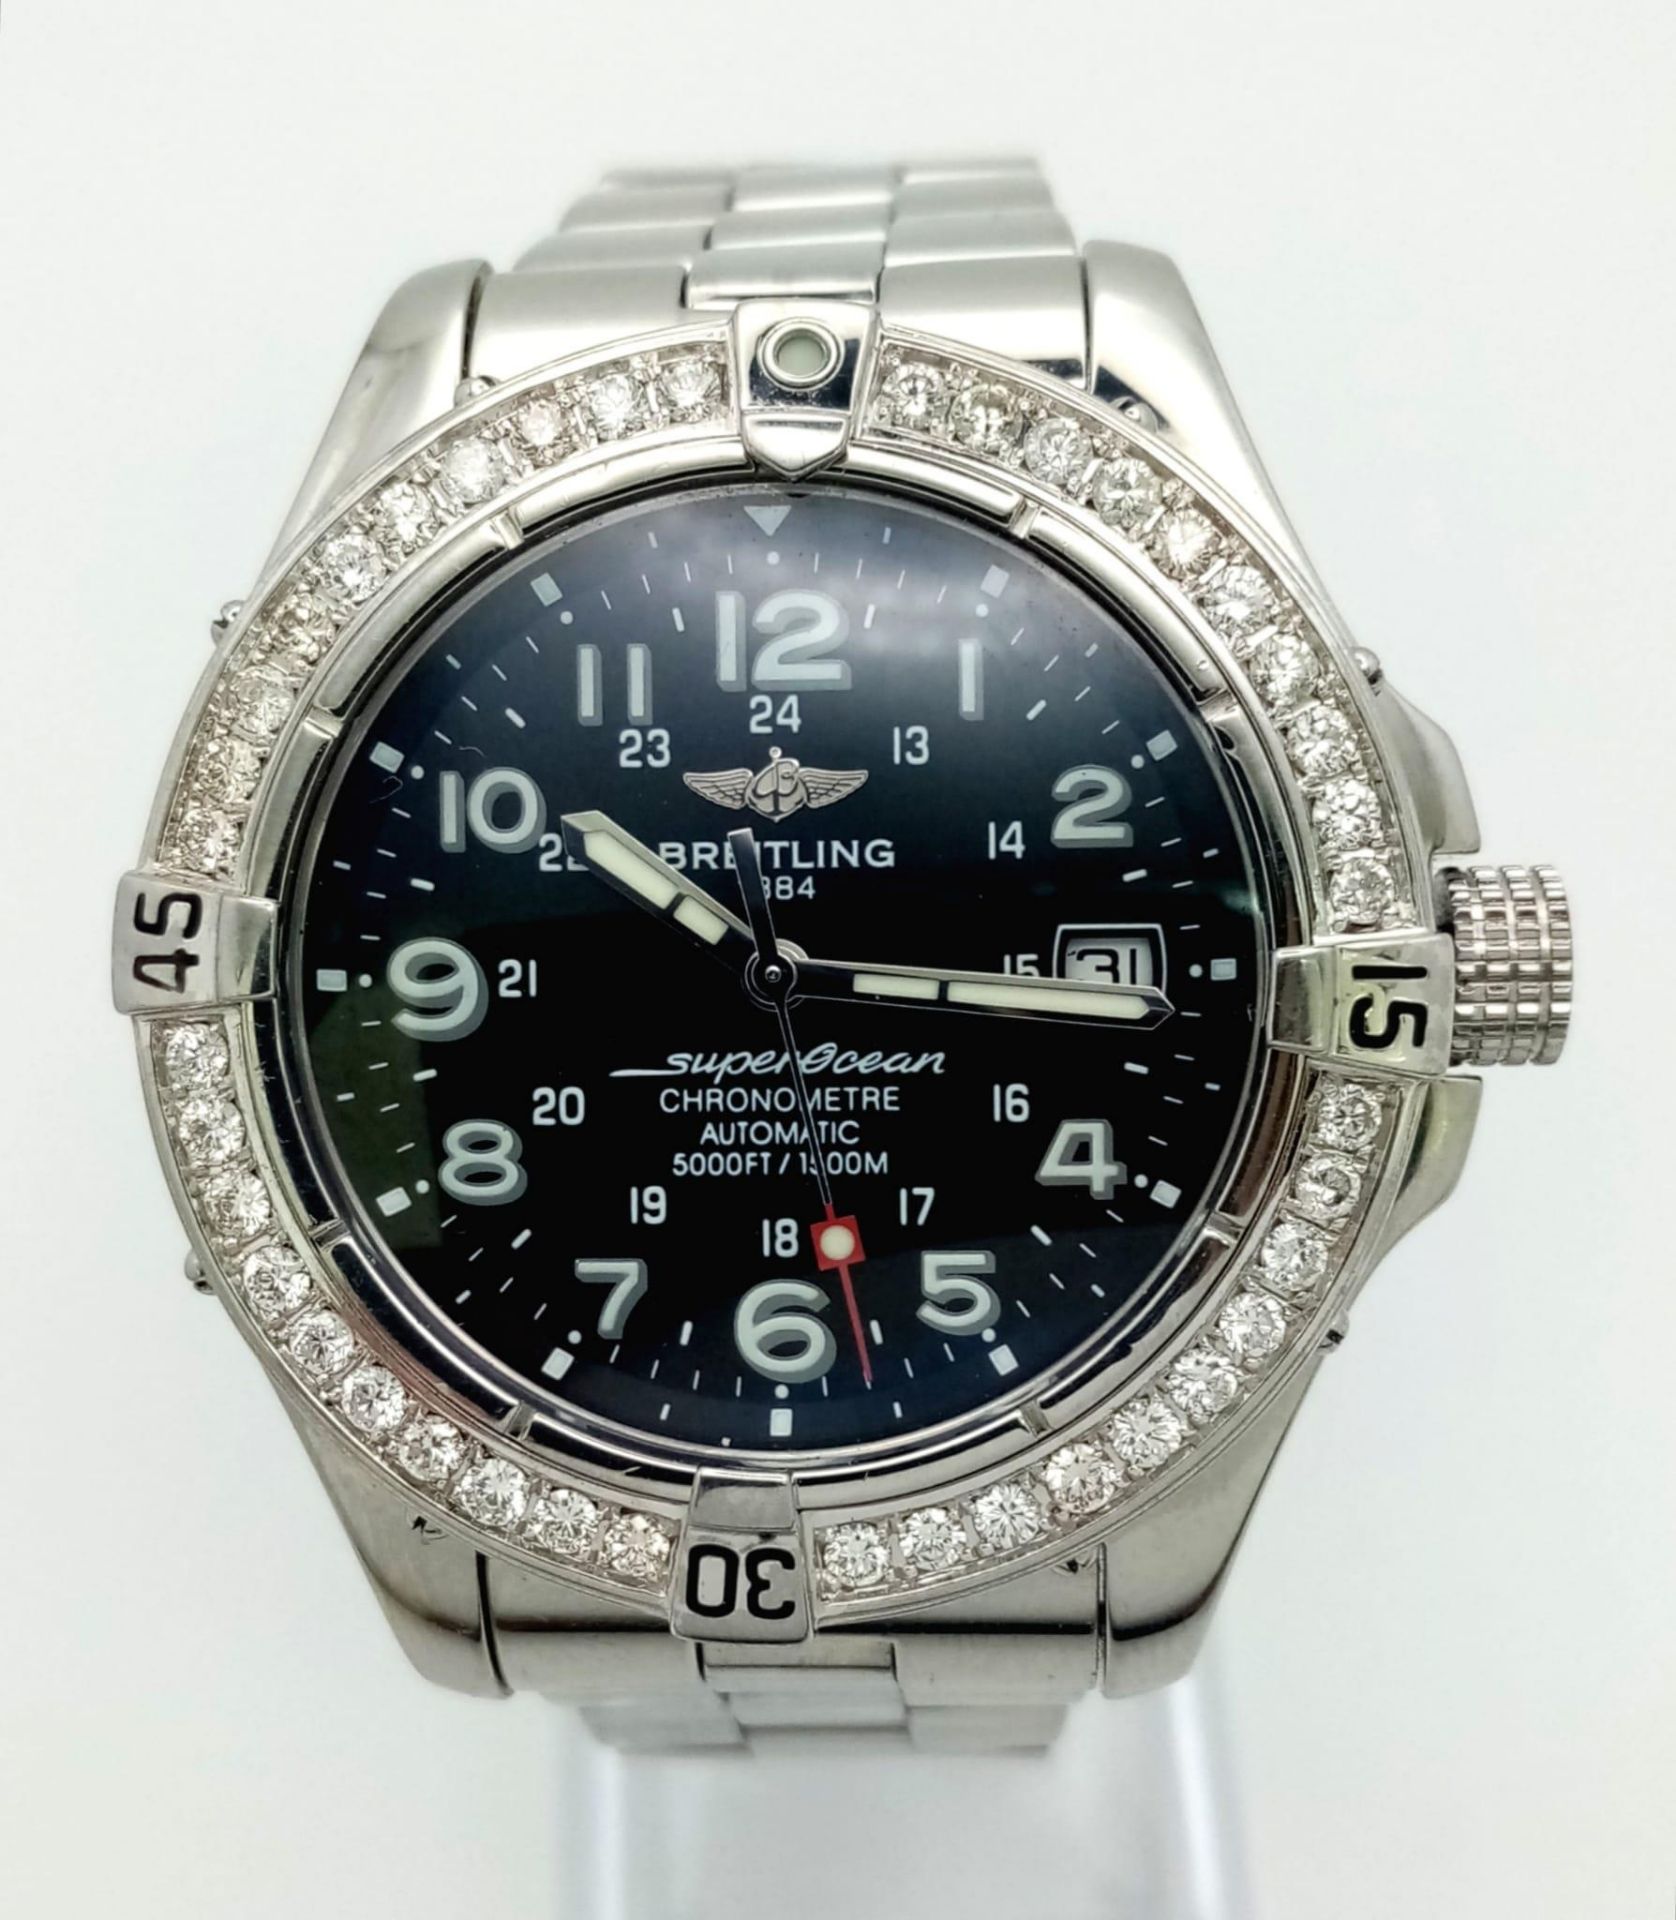 A Breitling SuperOcean Chronometer Automatic Gents Watch. Stainless steel strap and case - 42mm. - Image 2 of 9